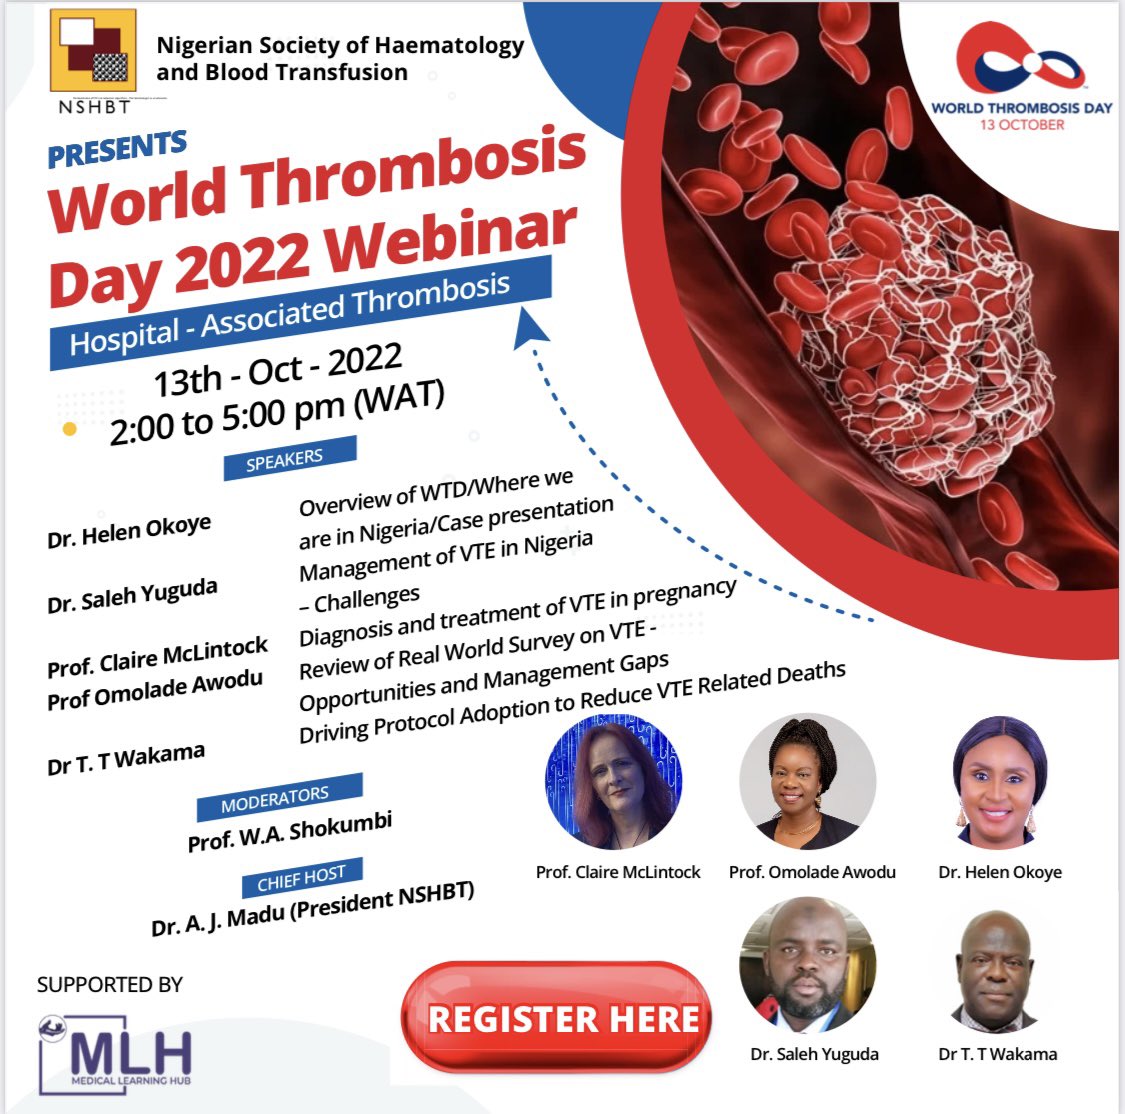 The Nigerian Society for Haematology & Blood Transfusion celebrates the World Thrombosis Day this year with a Webinar. Register, Log in, Participate 👌🏽 #worldthrombosisday #wtd2022 #stopthrombosis #thrombosis #bloodclots #dvt #vte #pe #nshbt